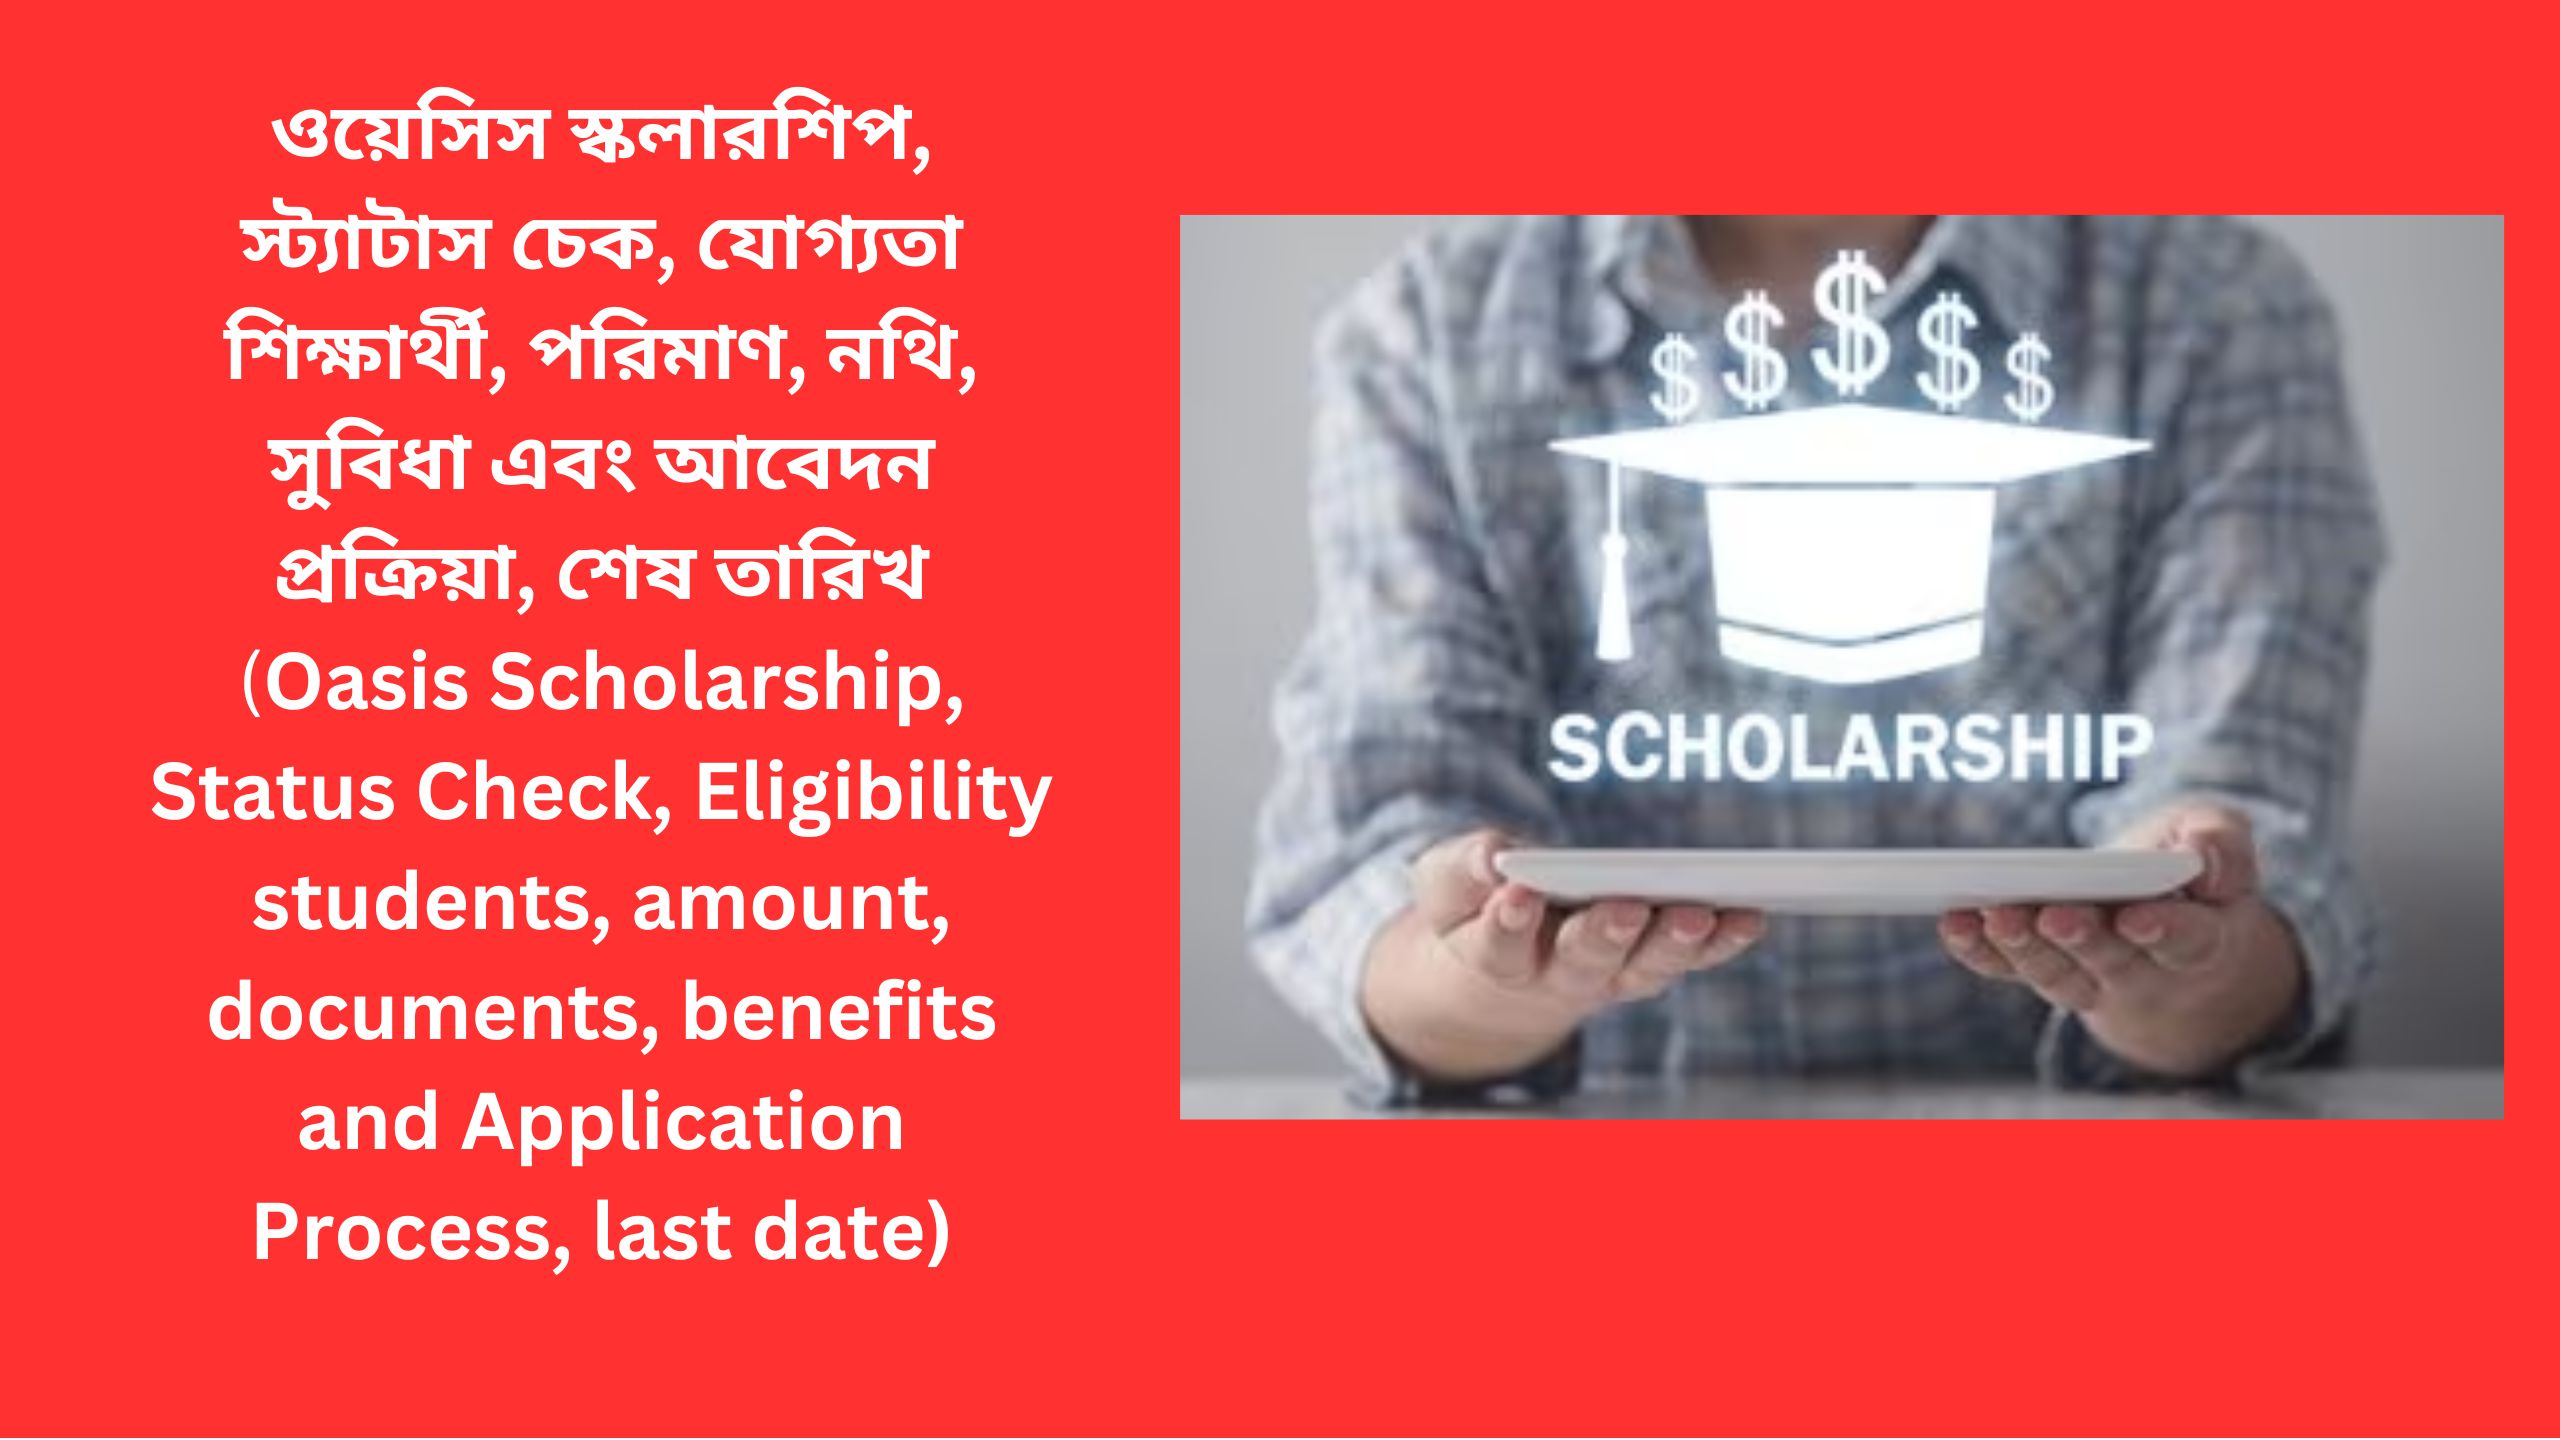 Oasis Scholarship, Status Check, Eligibility students, amount, documents, benefits and Application Process, last date